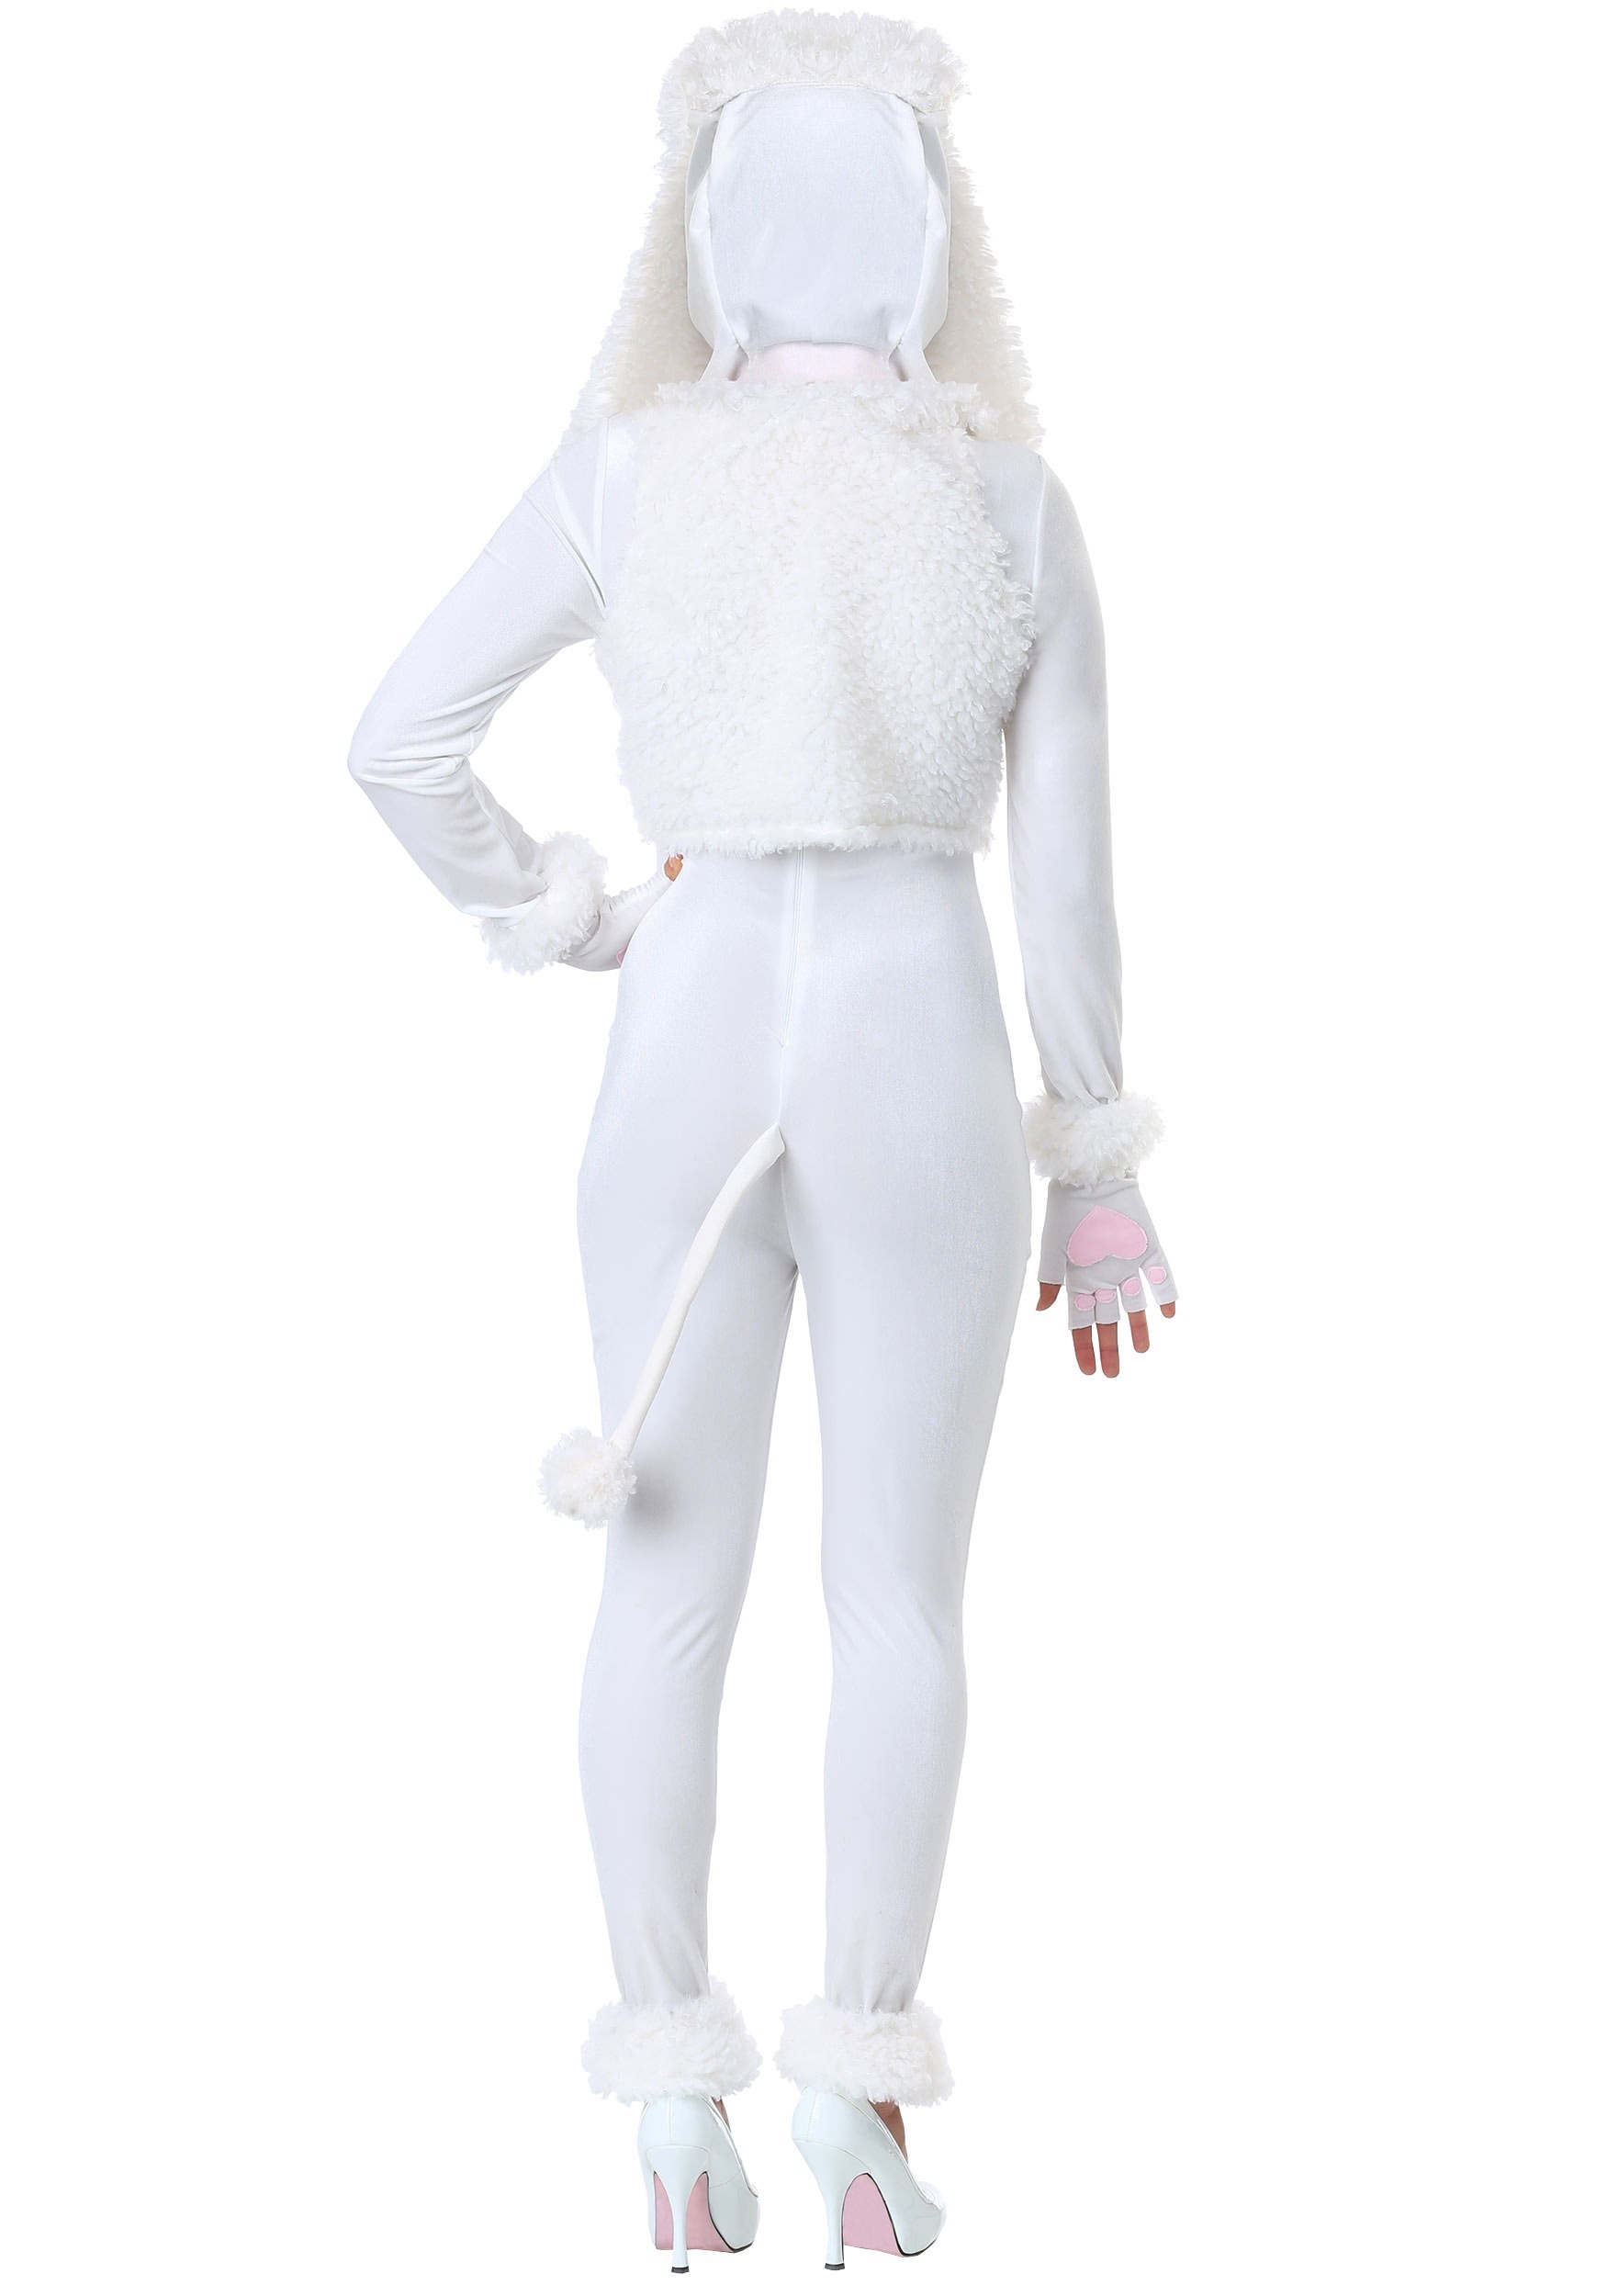 White Poodle Fancy Dress Costume For Women